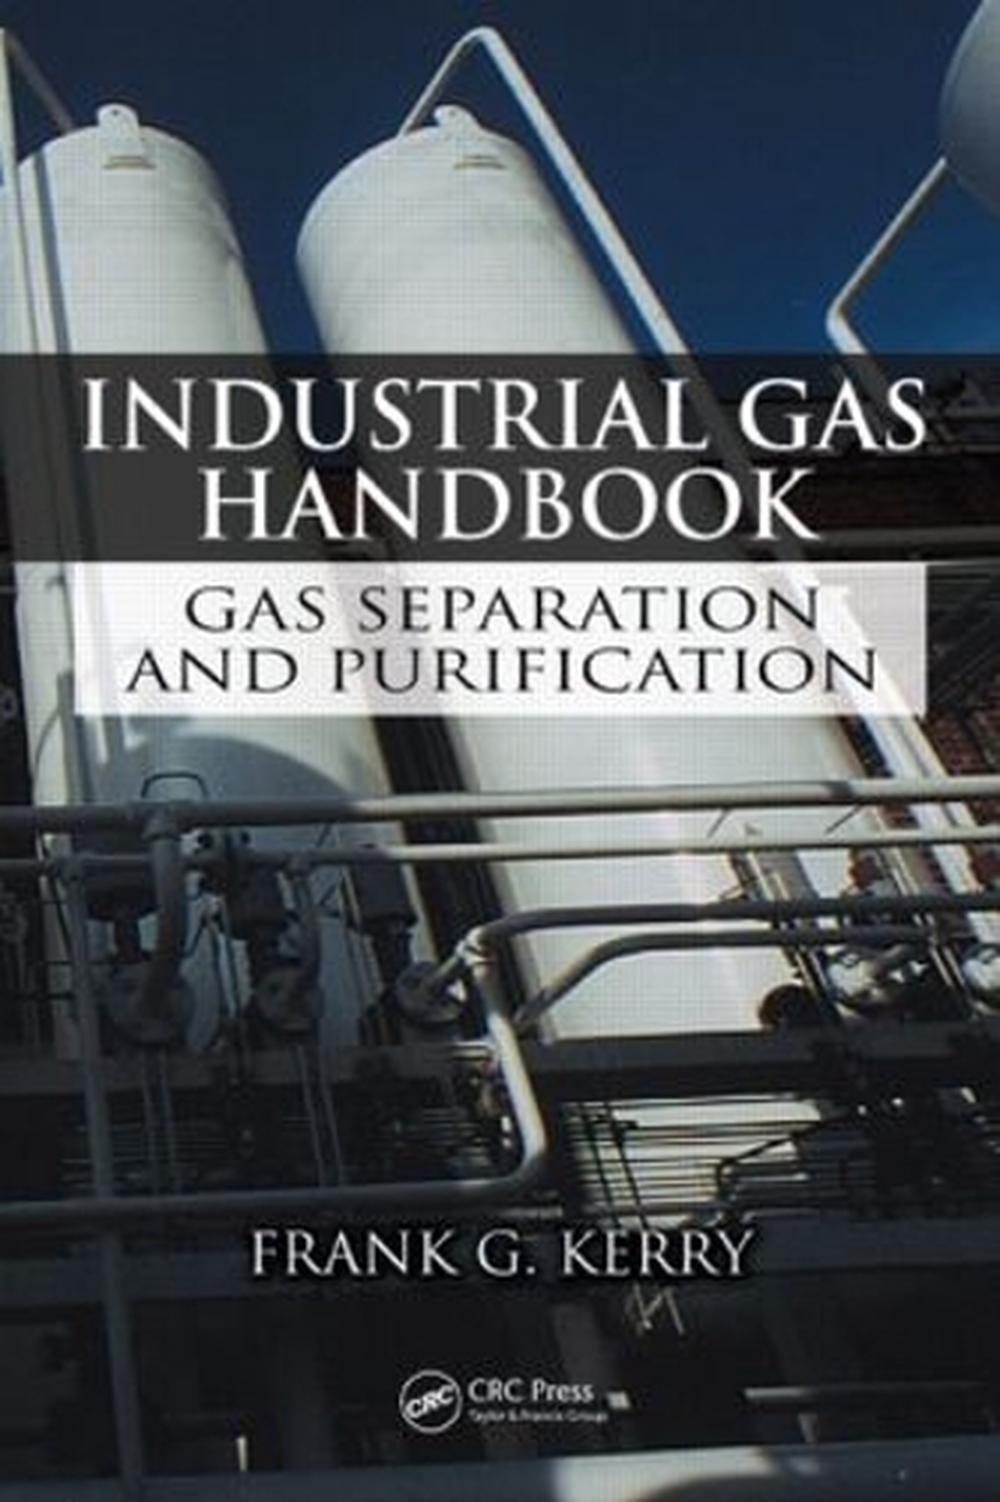 Industrial Gas Handbook Gas Separation and Purification by Frank G. Kerry (Engl 9780849390050